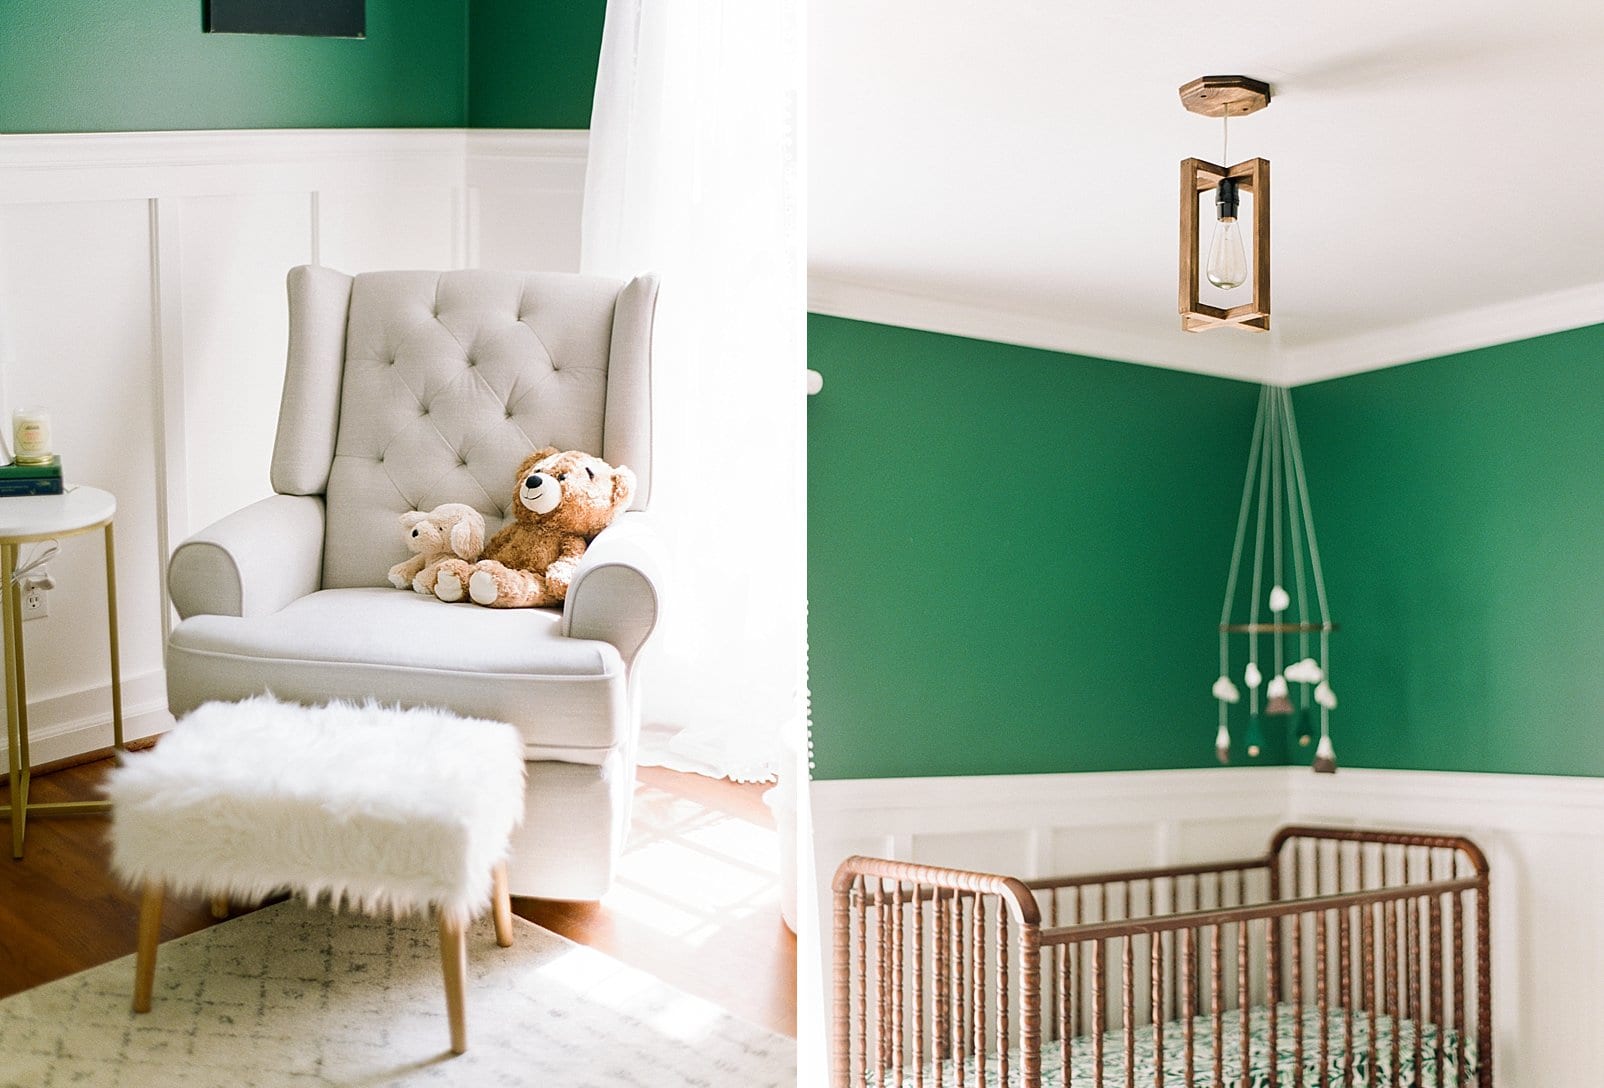 Raleigh nursery with emerald green wall and brown jenny lind crib photo